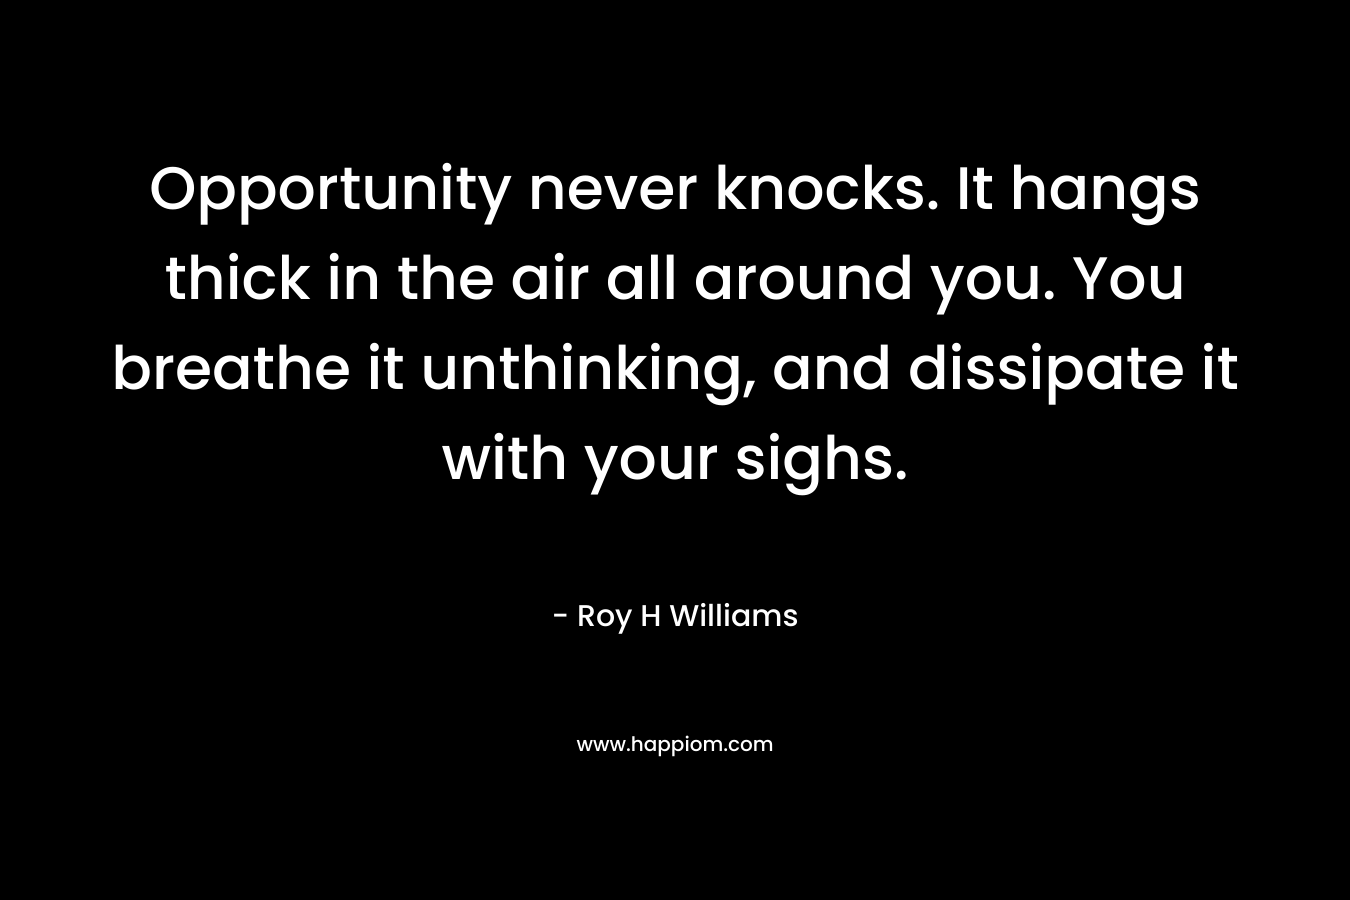 Opportunity never knocks. It hangs thick in the air all around you. You breathe it unthinking, and dissipate it with your sighs.